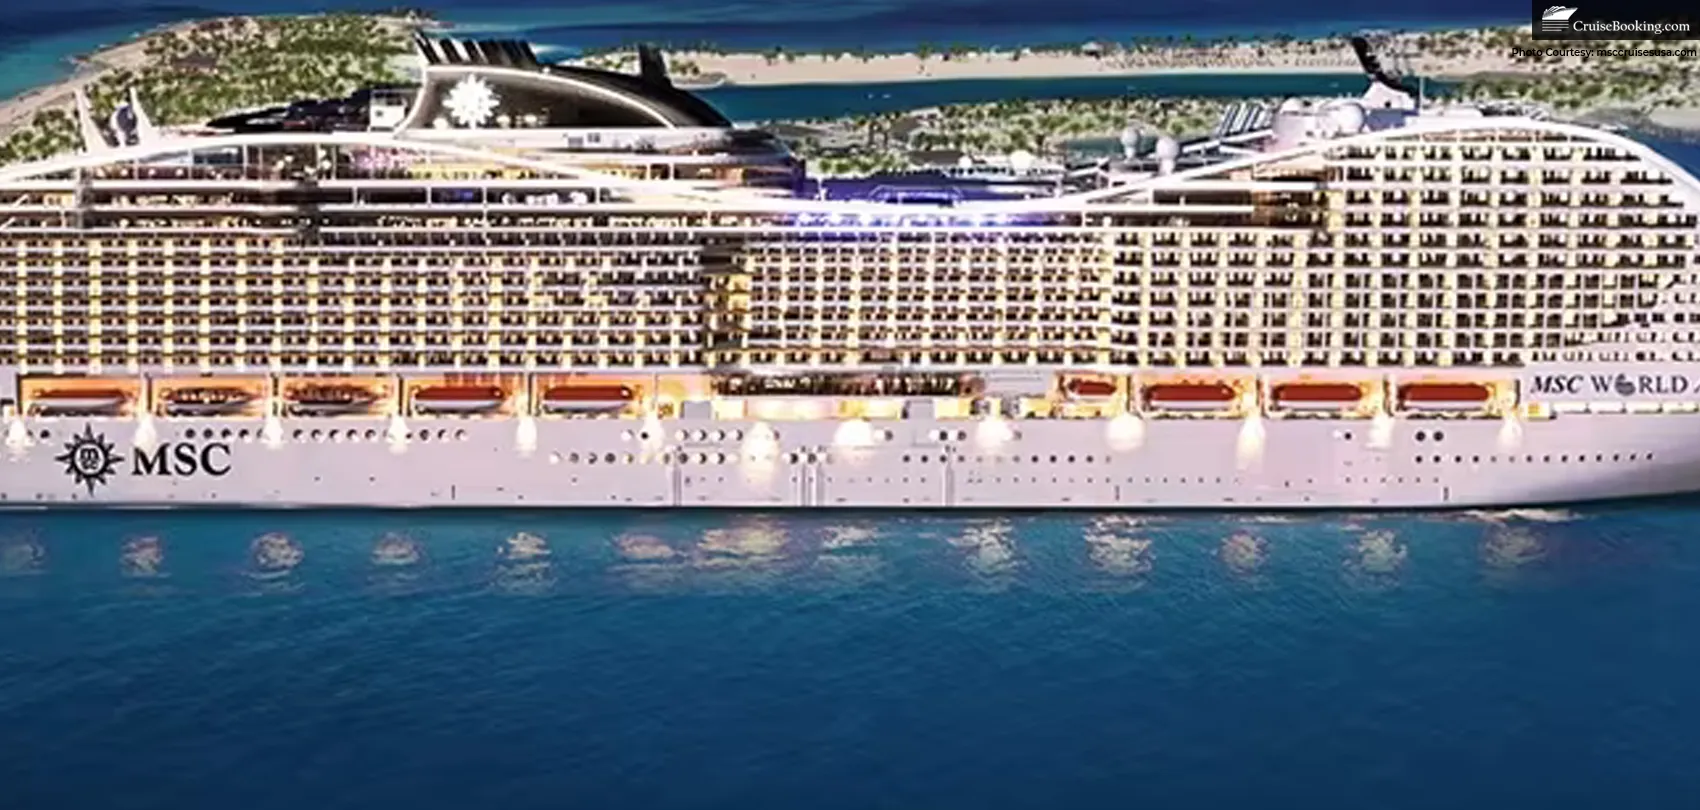 The MSC World America begins sales in April 2025, sailing from Miami